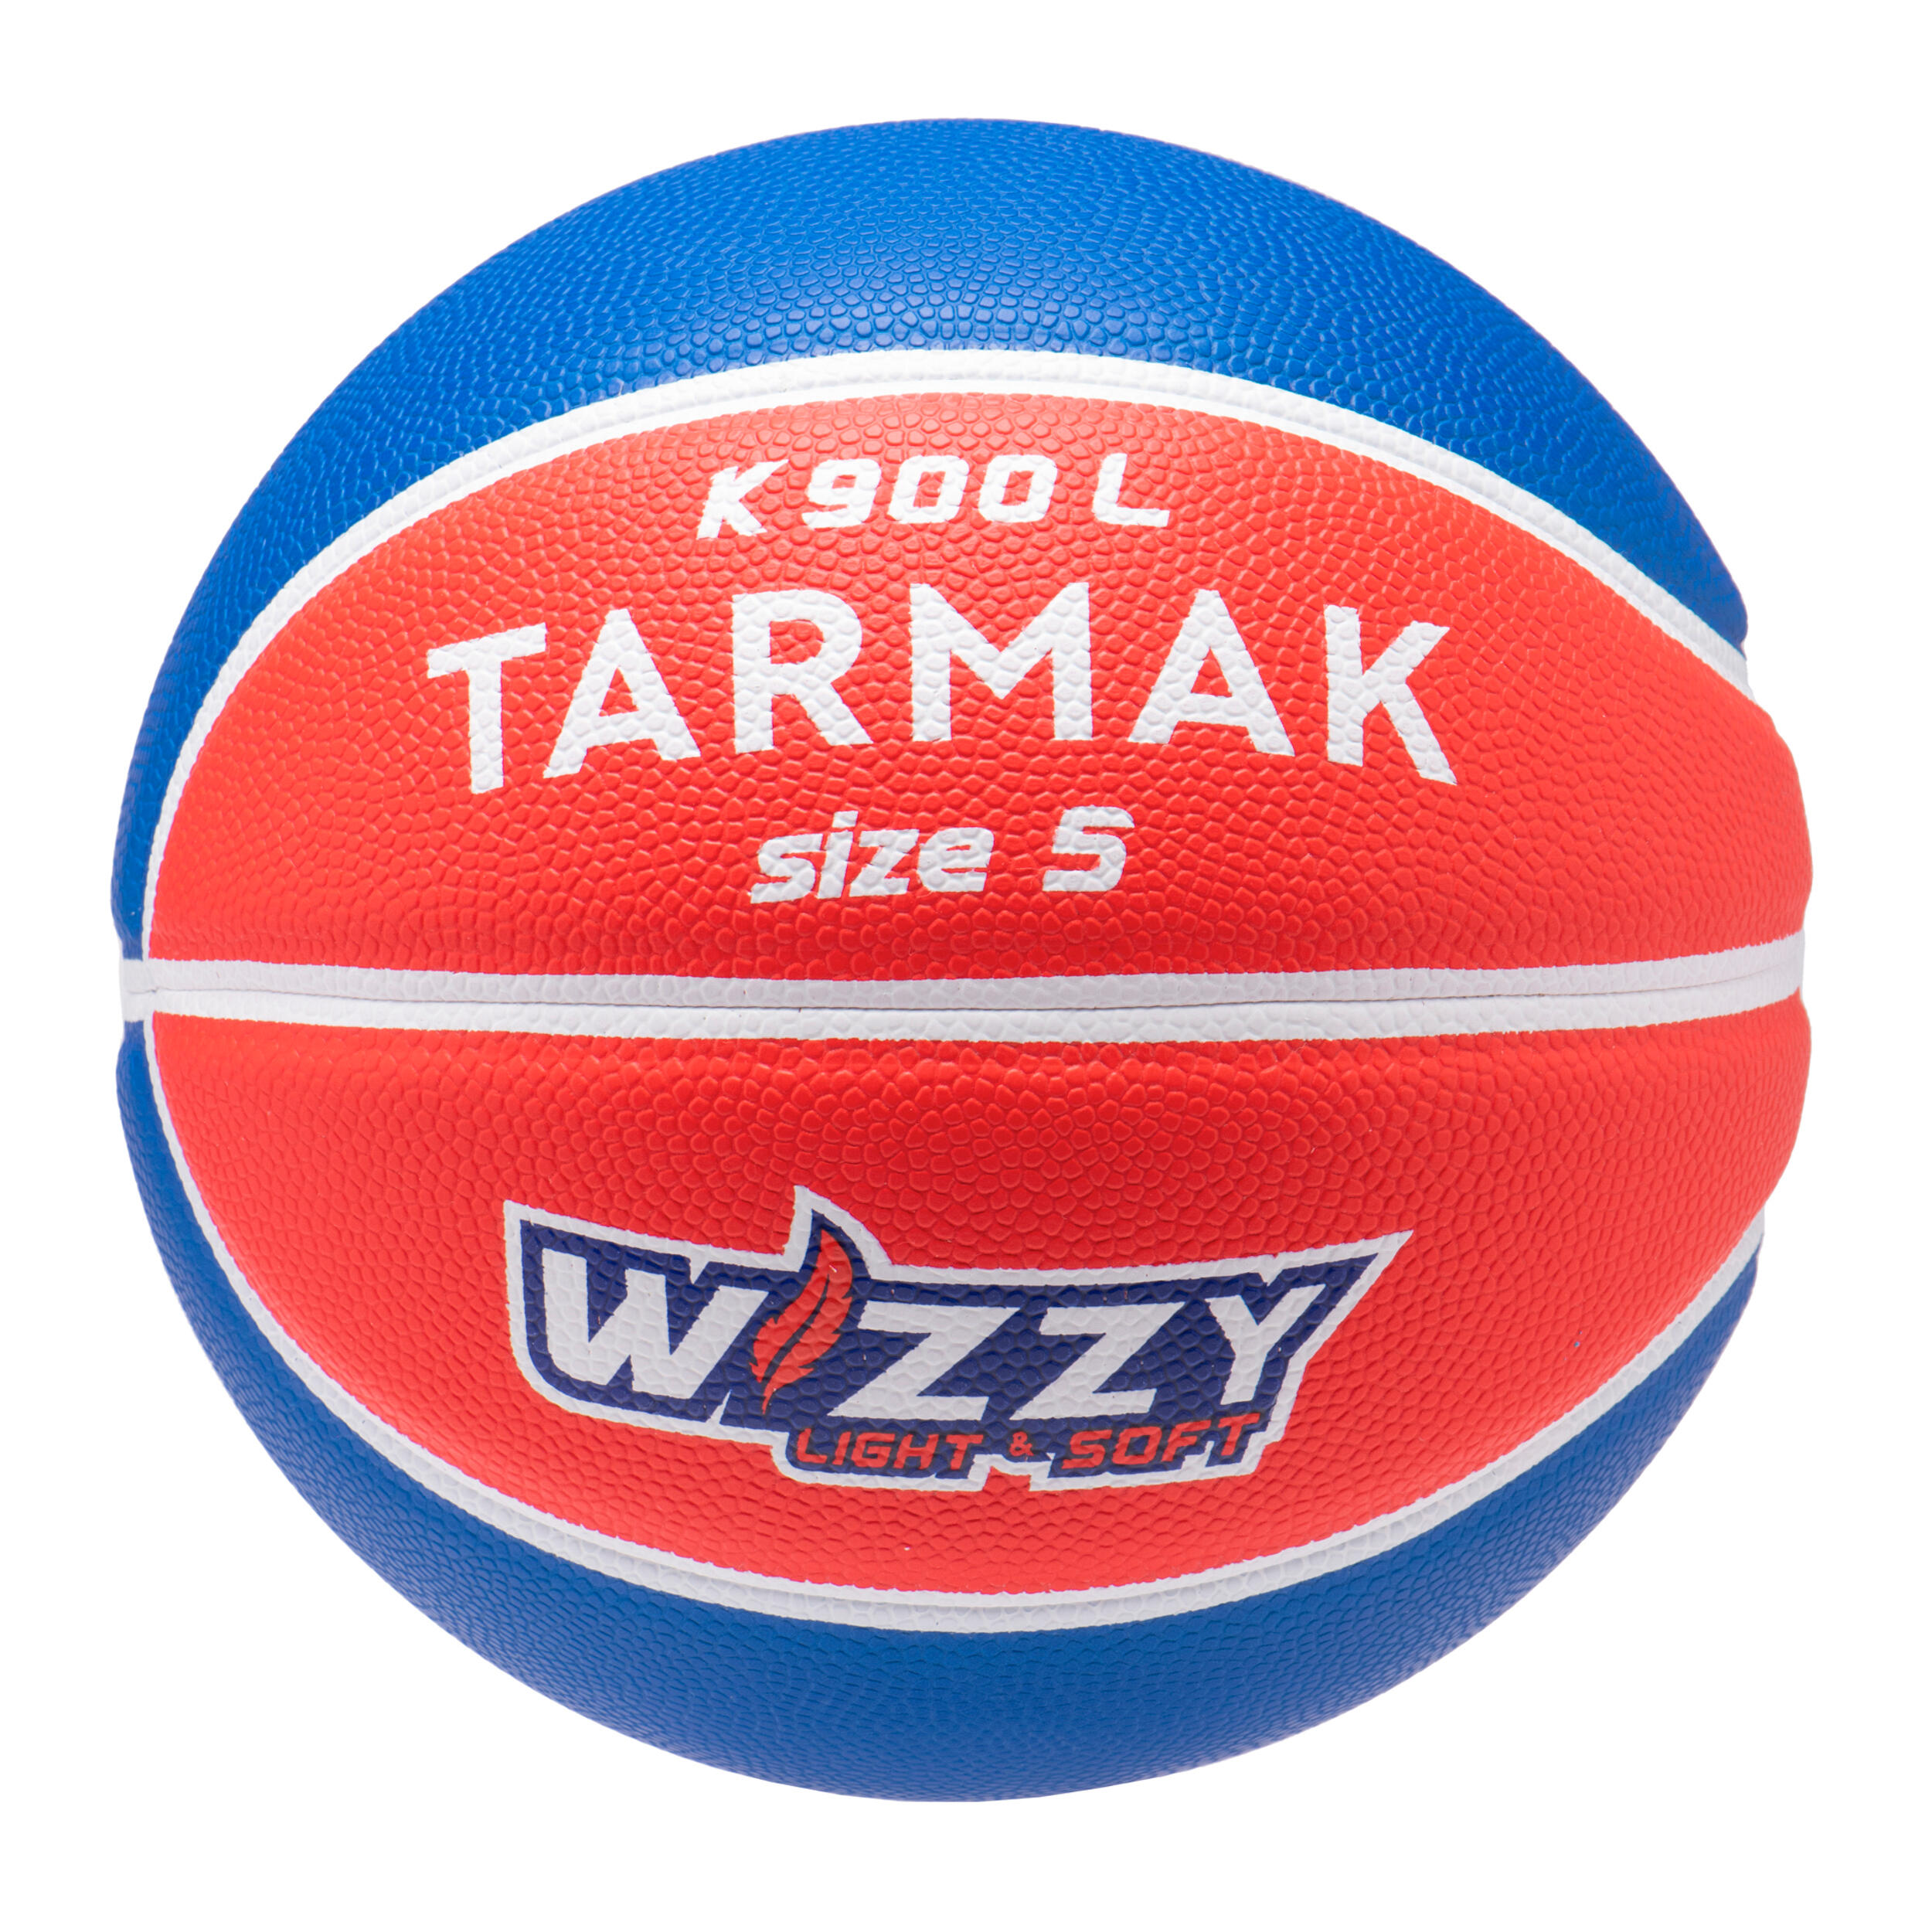 K900 Wizzy Ball - Blue/Red 1/8